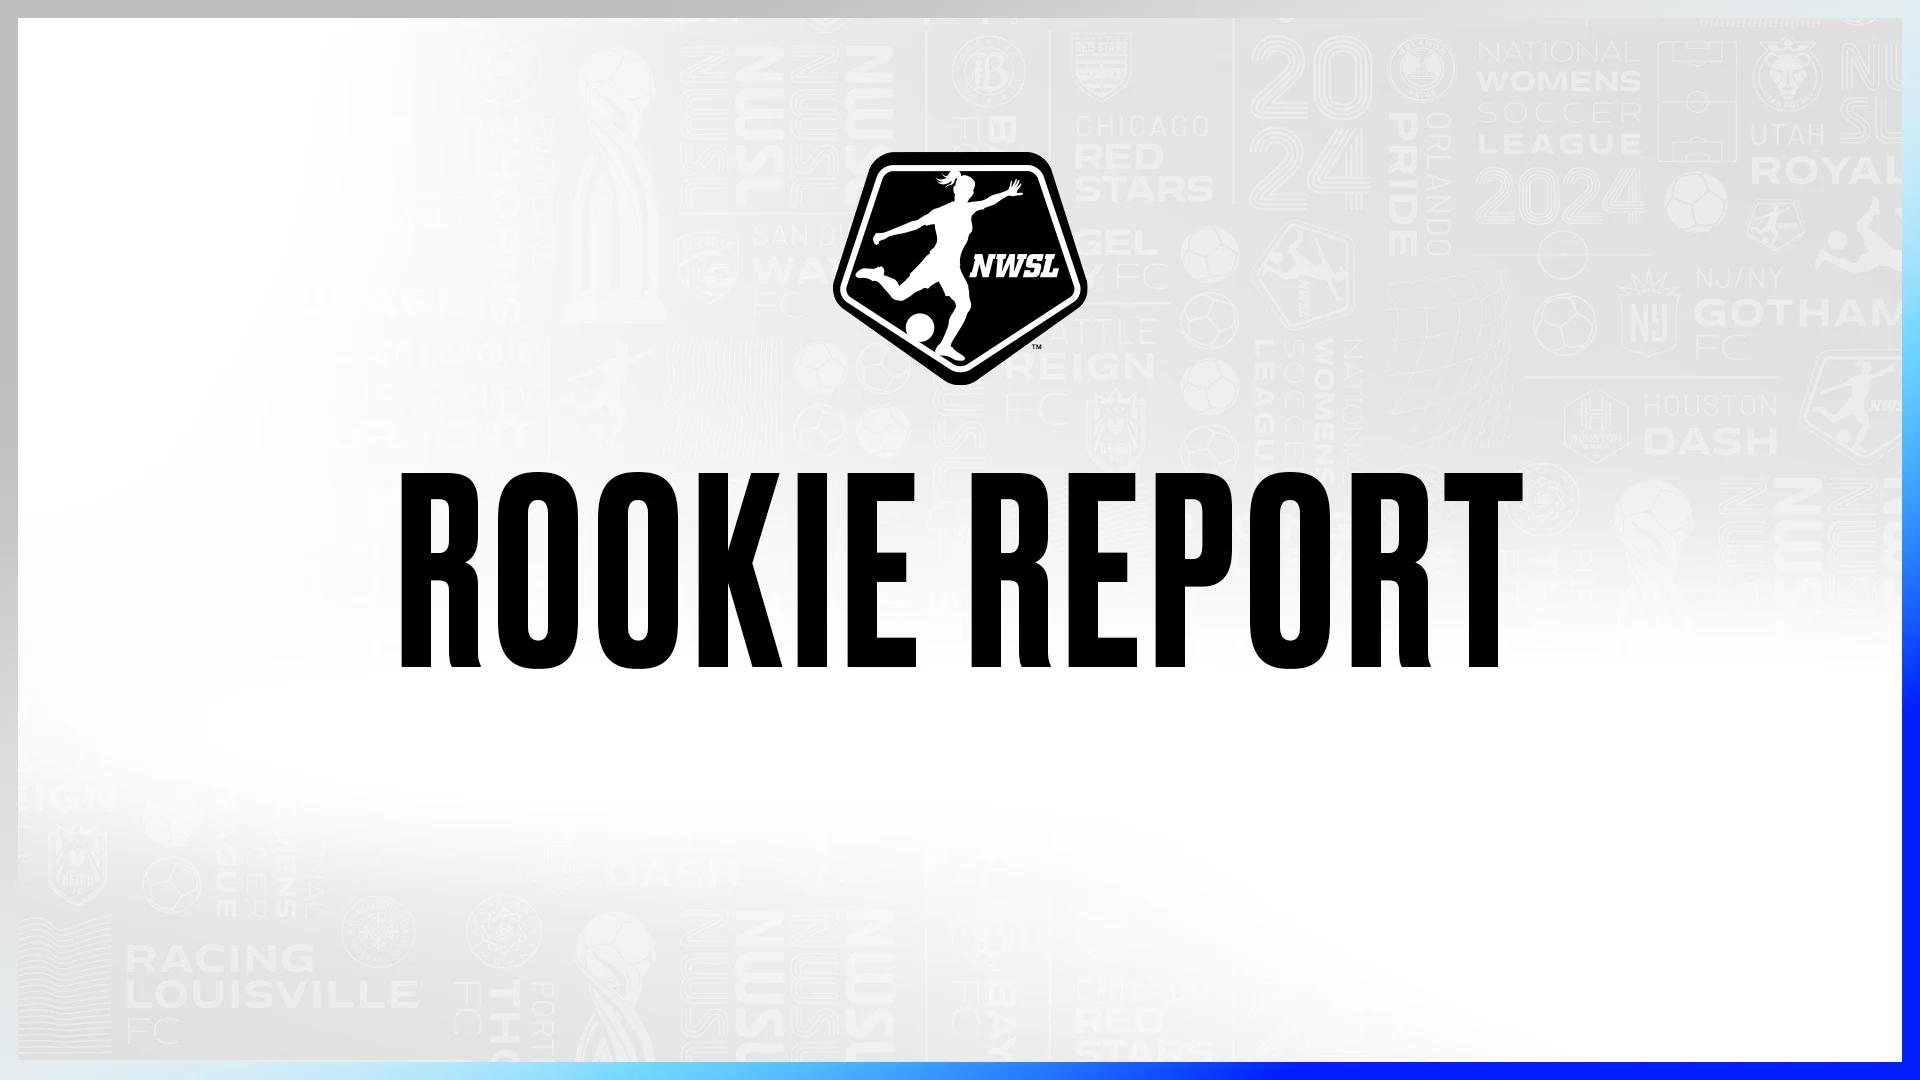 NWSL Rookie Report